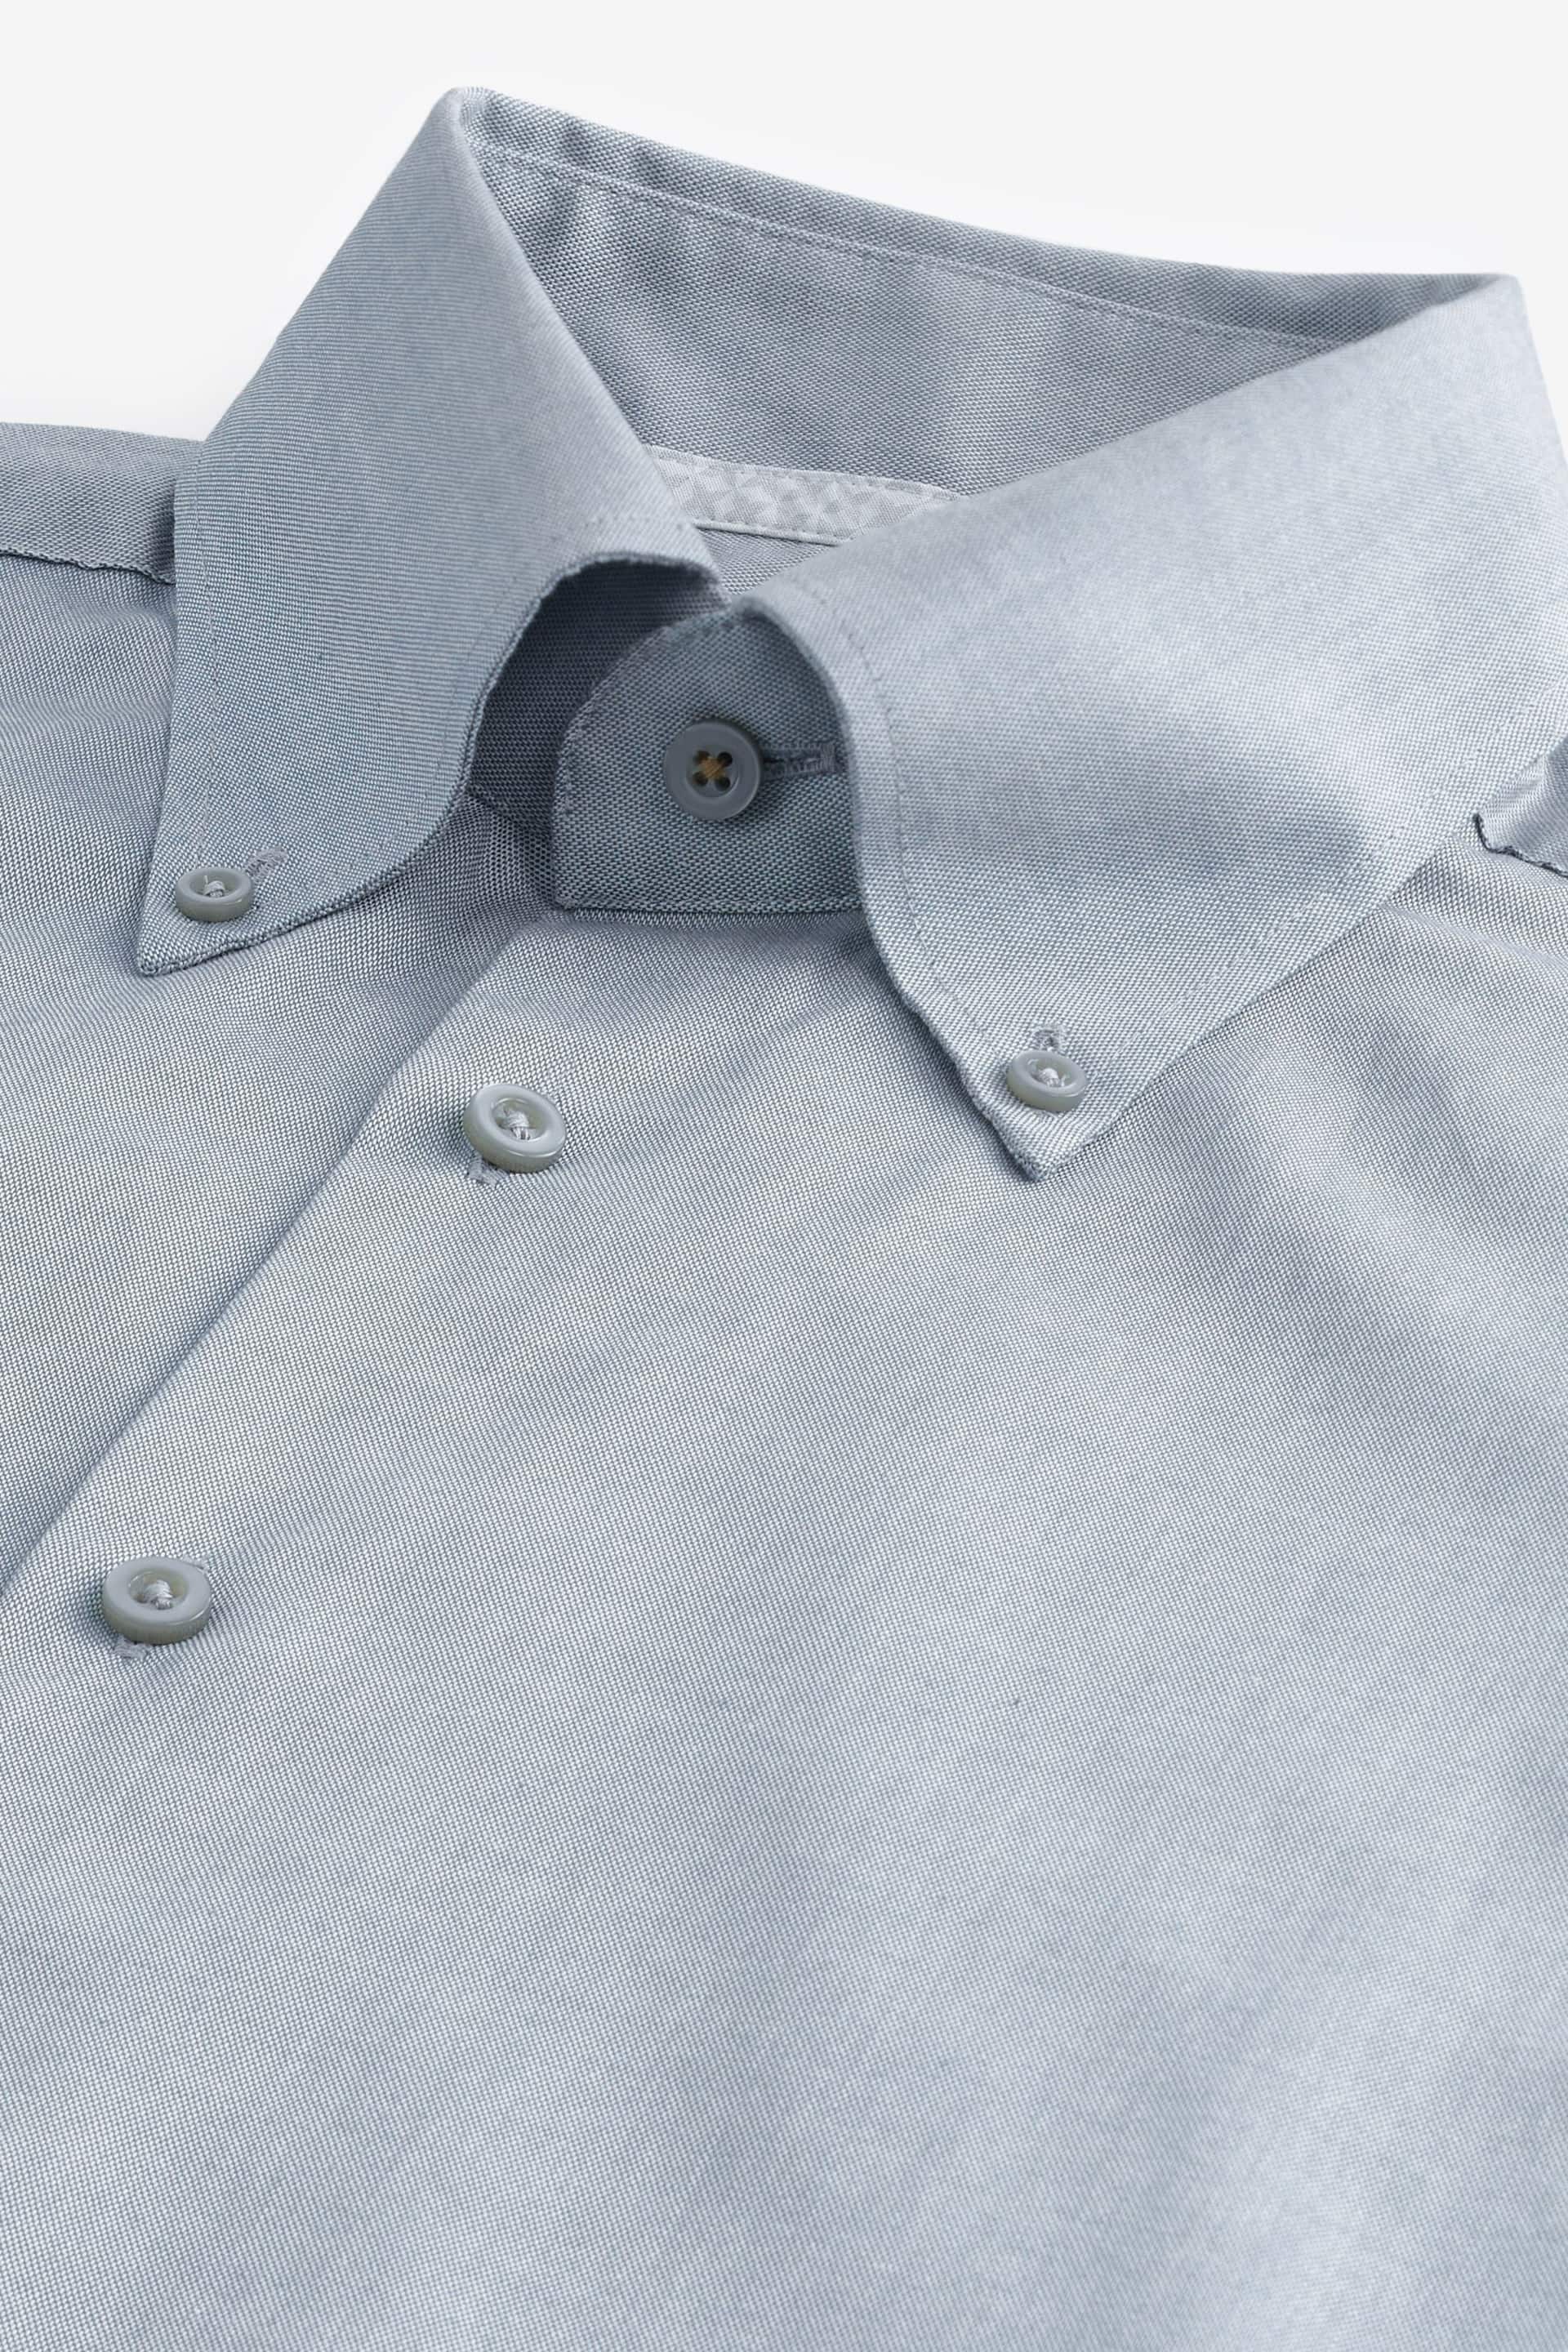 Green Oxford Single Cuff Textured Cotton Shirt - Image 8 of 8